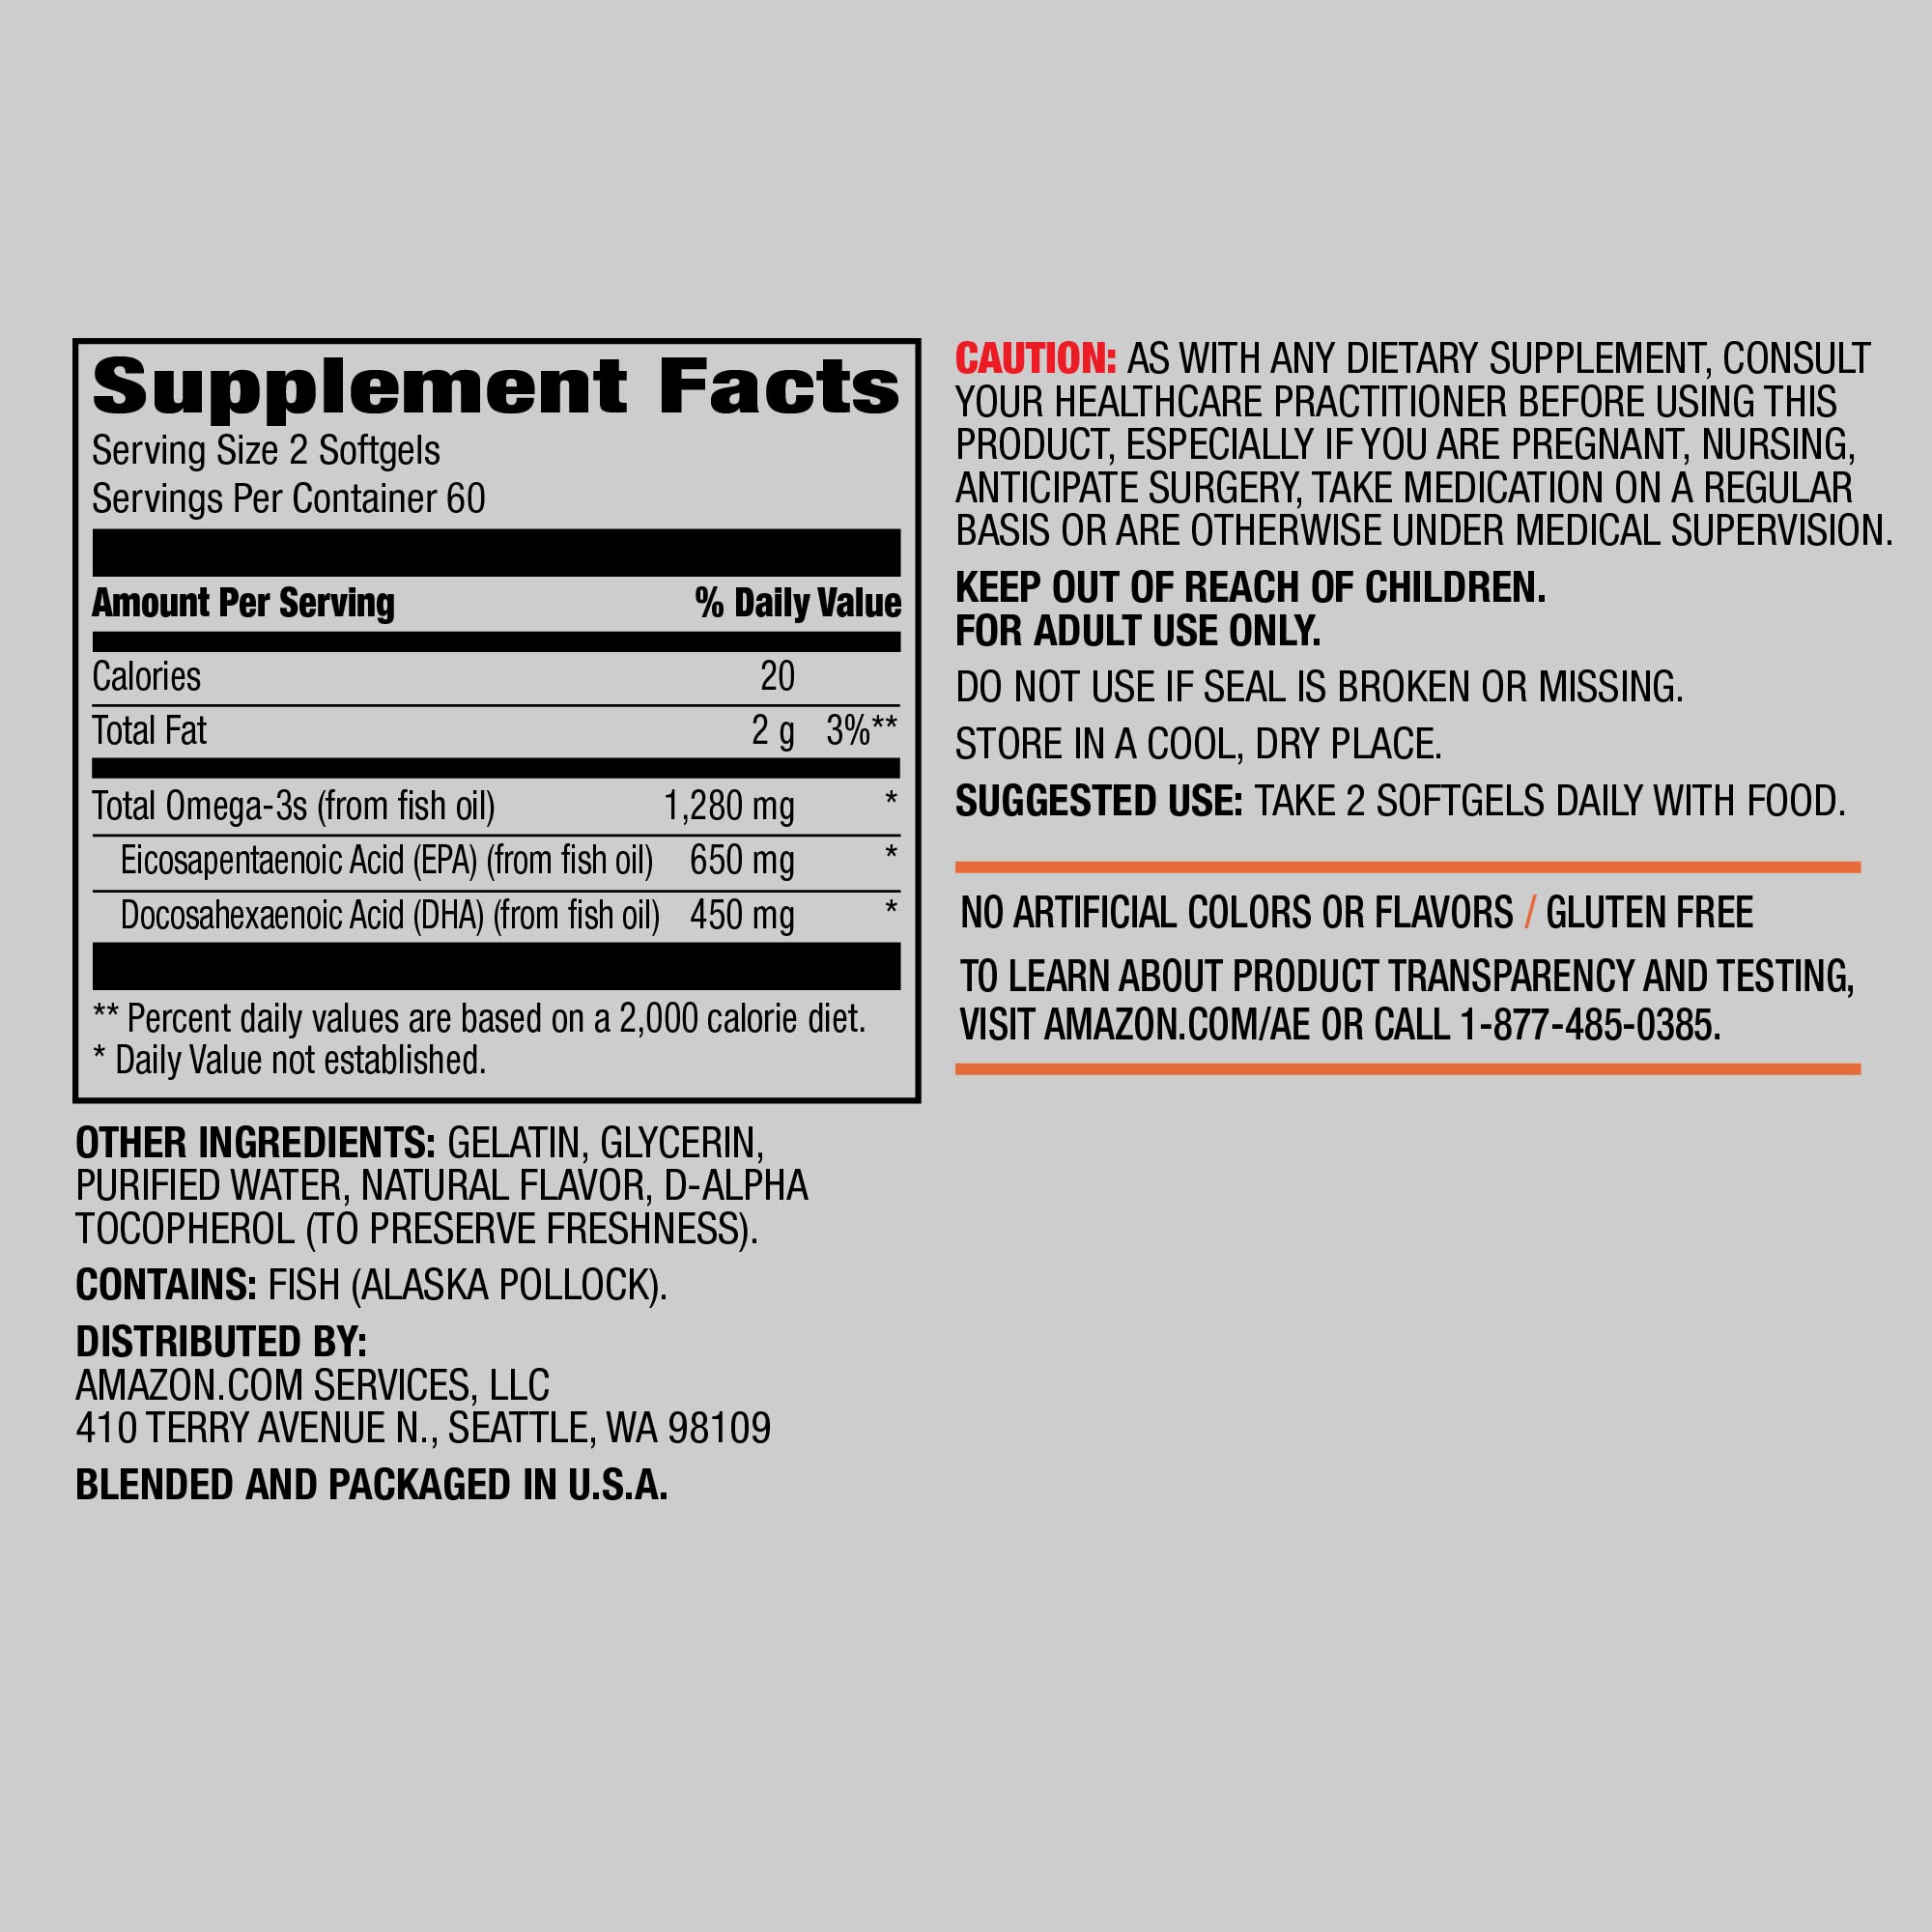 Amazon Elements Super Omega-3 with Natural Lemon Flavor, EPA & DHA Omega-3 fatty acids, 120 Count (1280 mg per serving, 2 Softgels) (Packaging may vary)